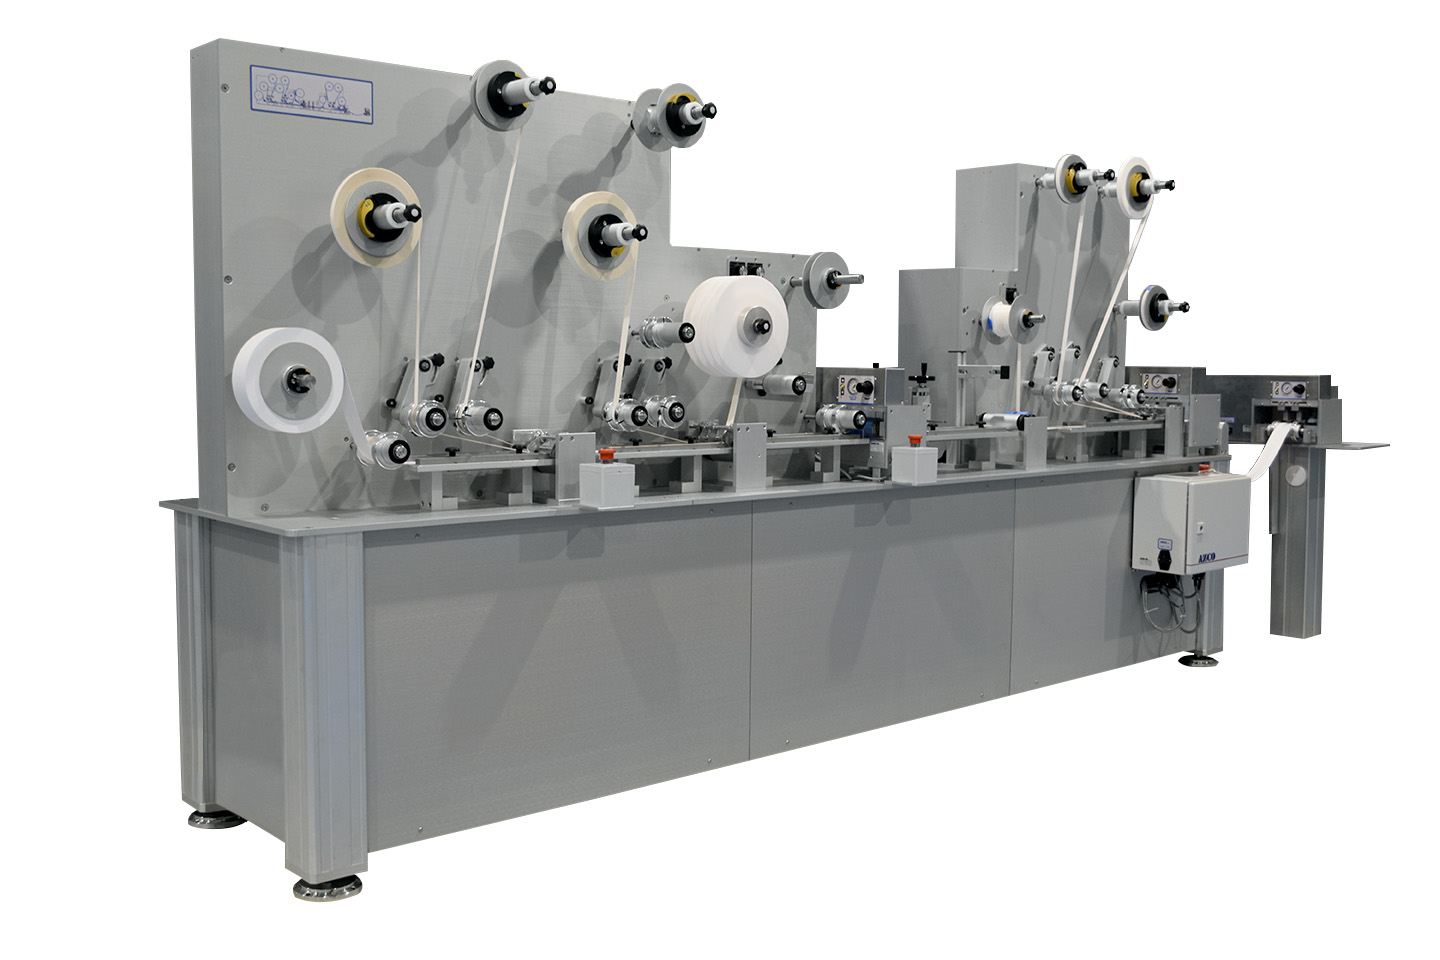 Multi land laminating system enables you to manufacture test strips